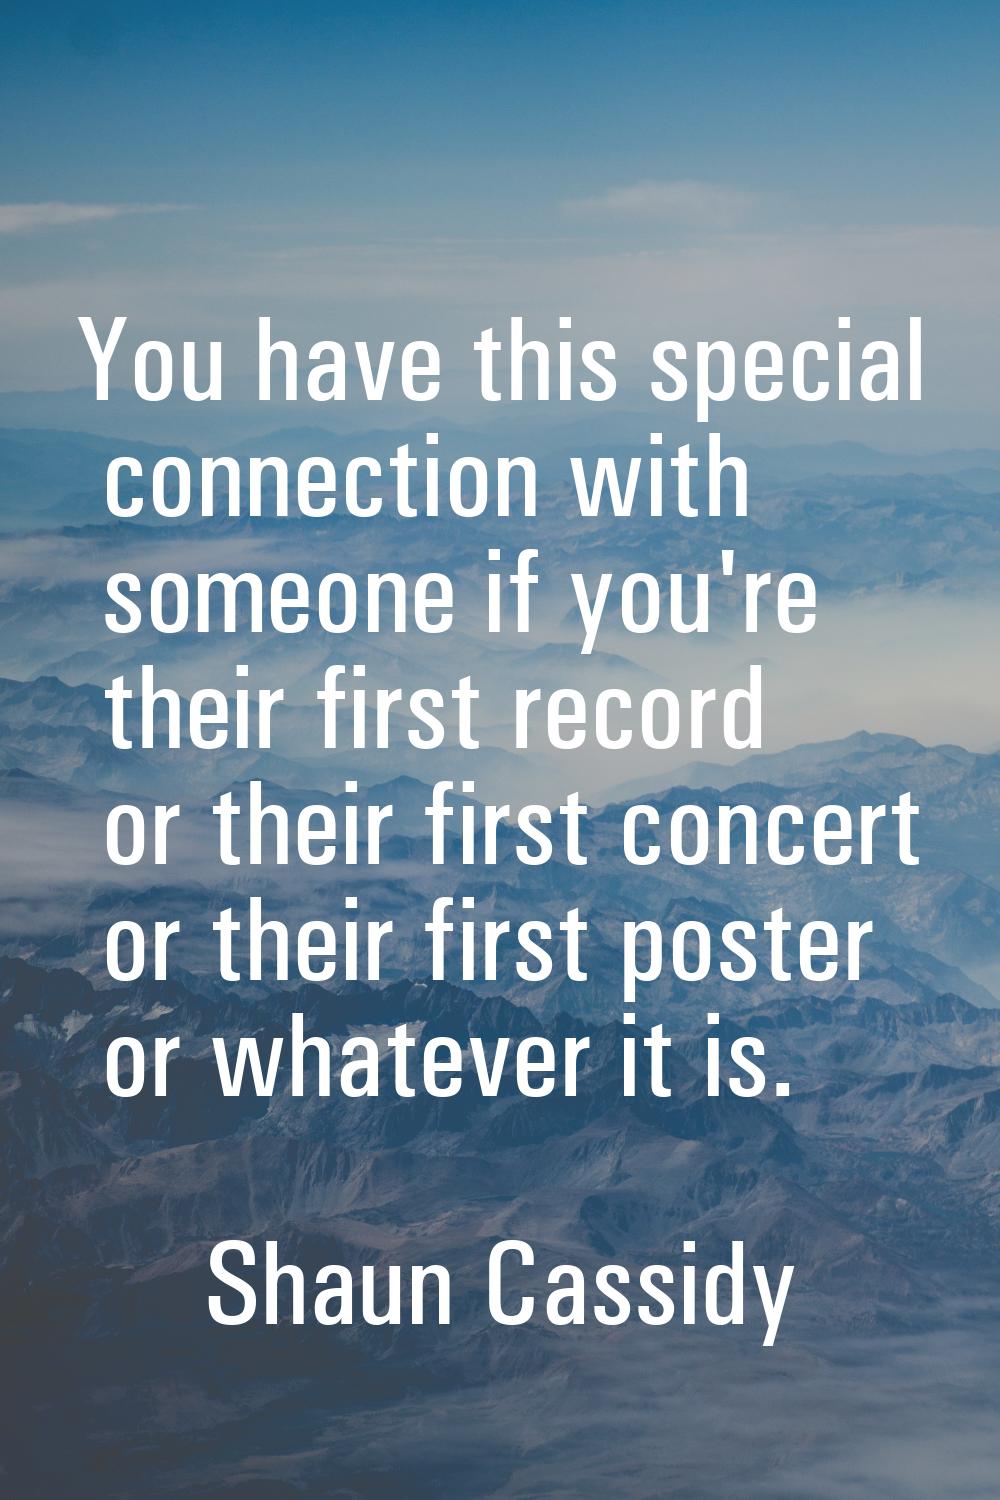 You have this special connection with someone if you're their first record or their first concert o